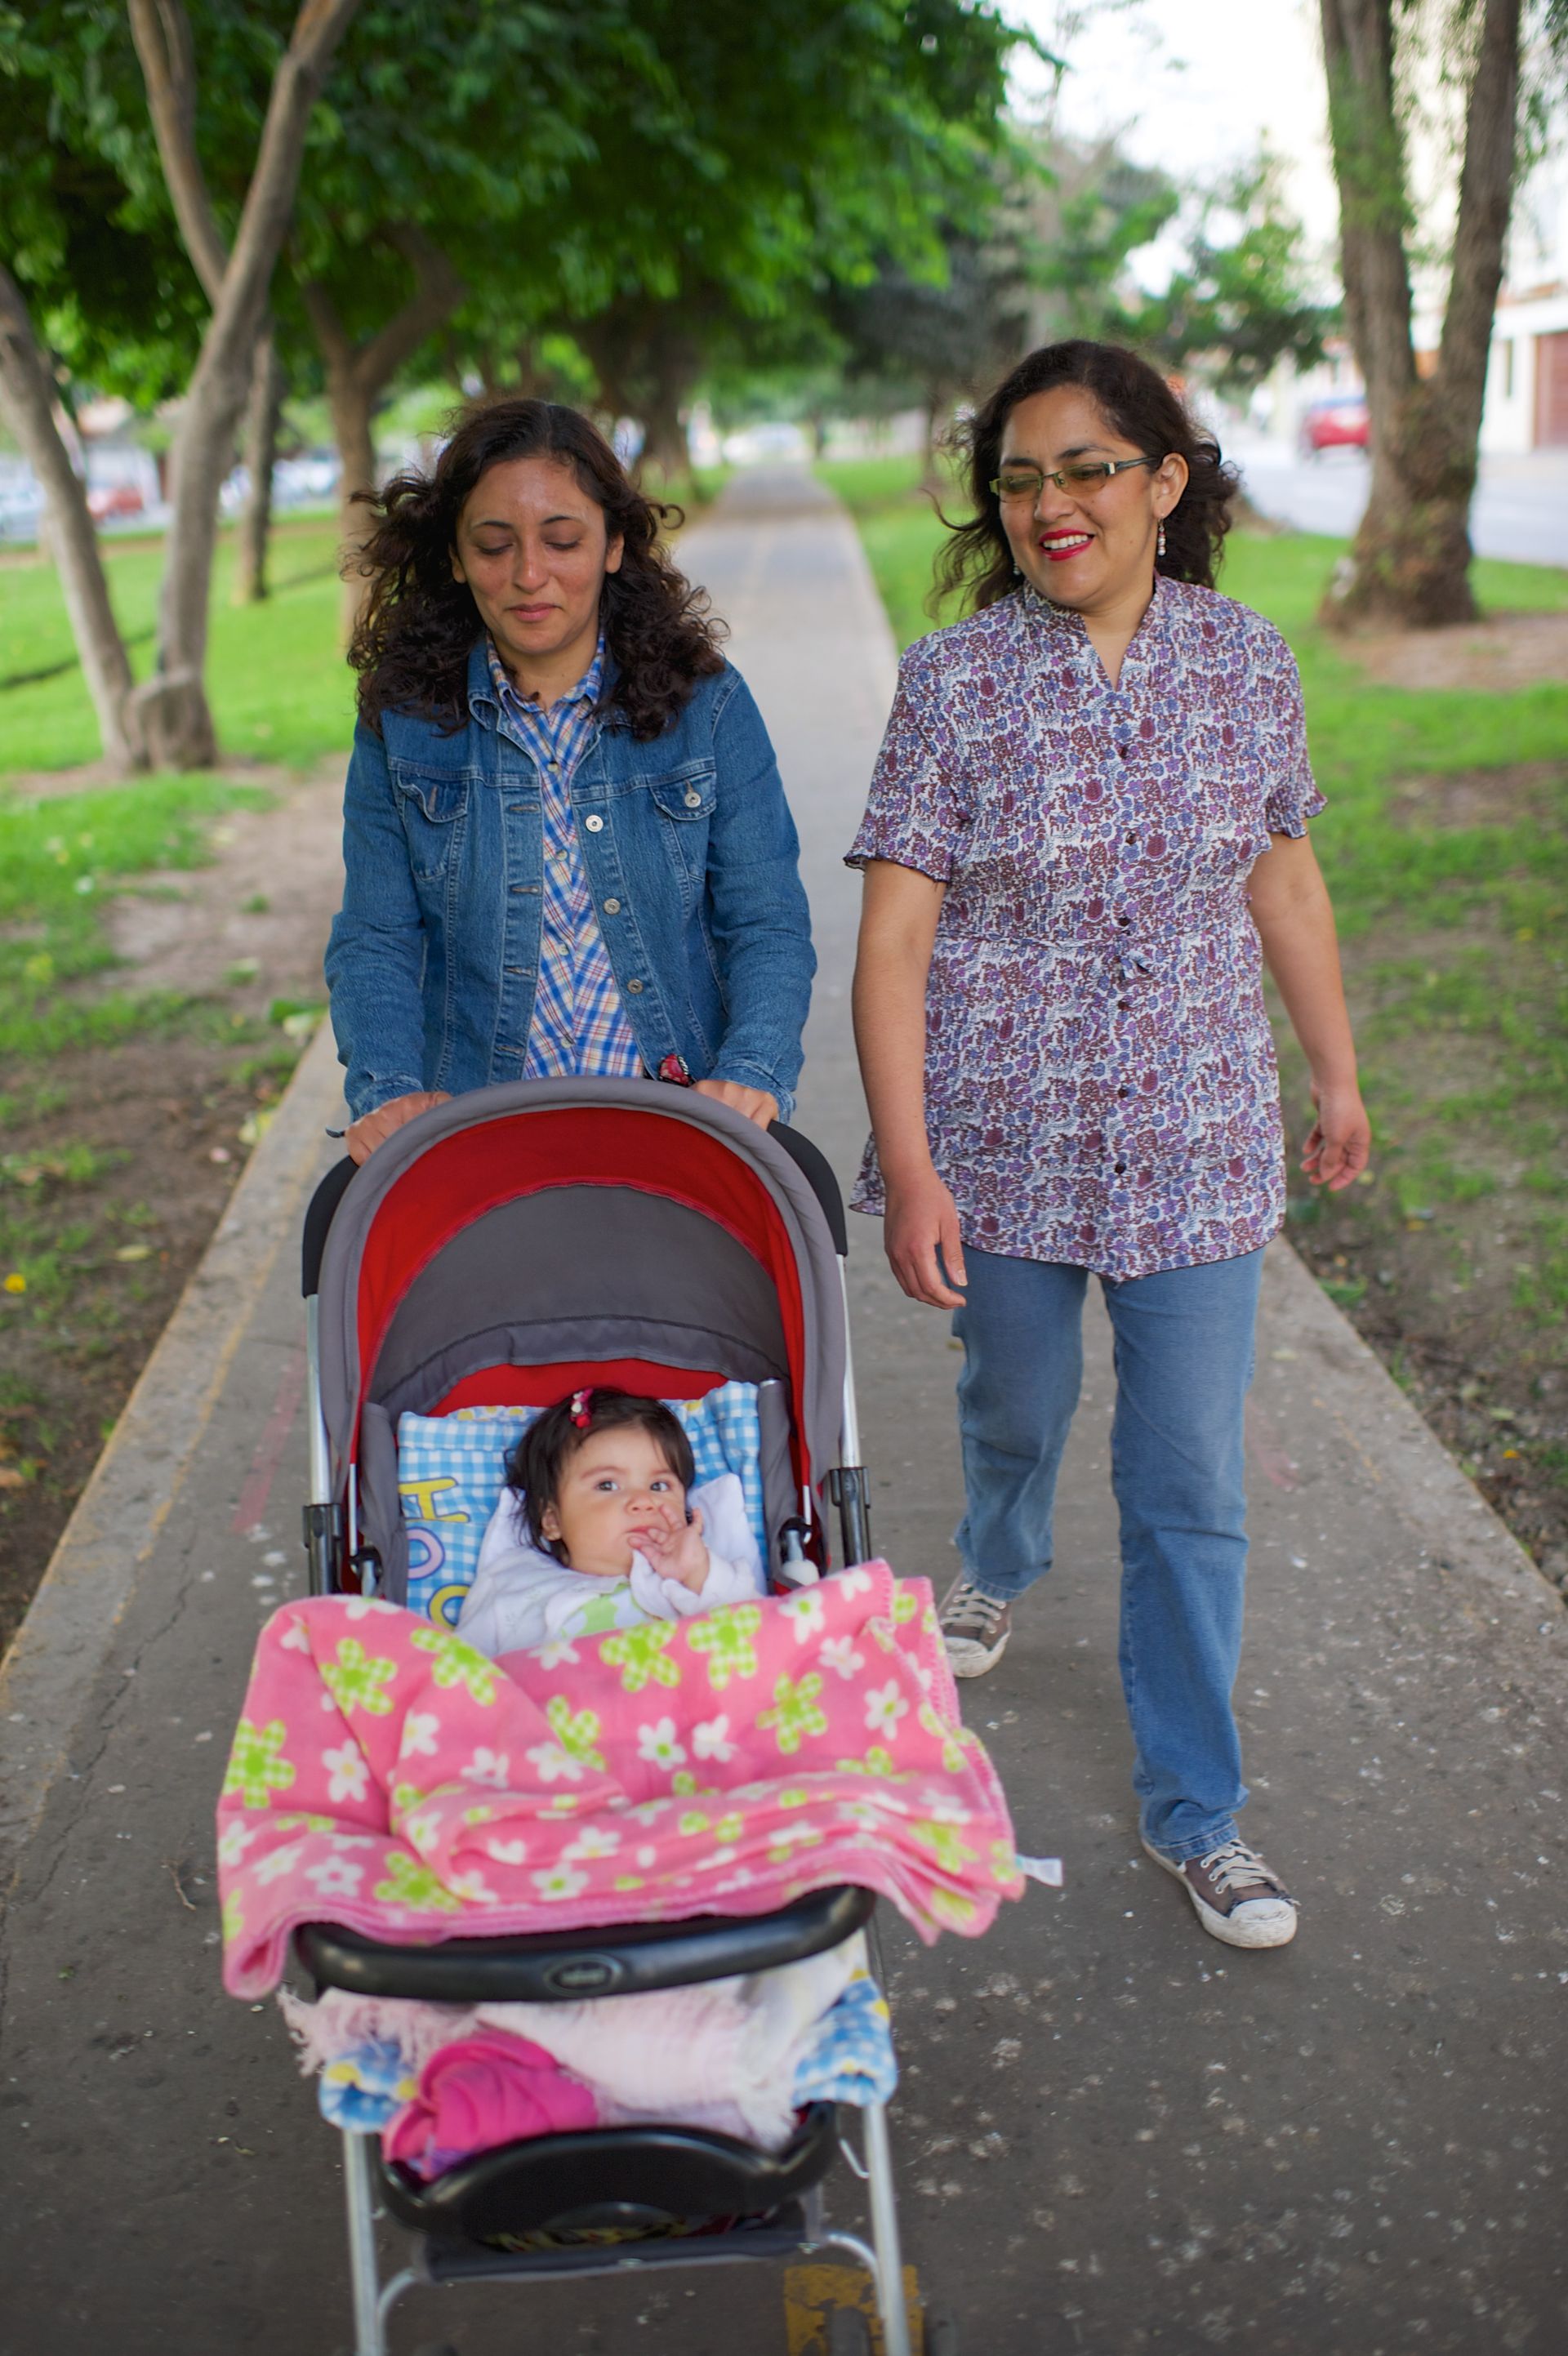 Two women push a baby in a stroller through a park.